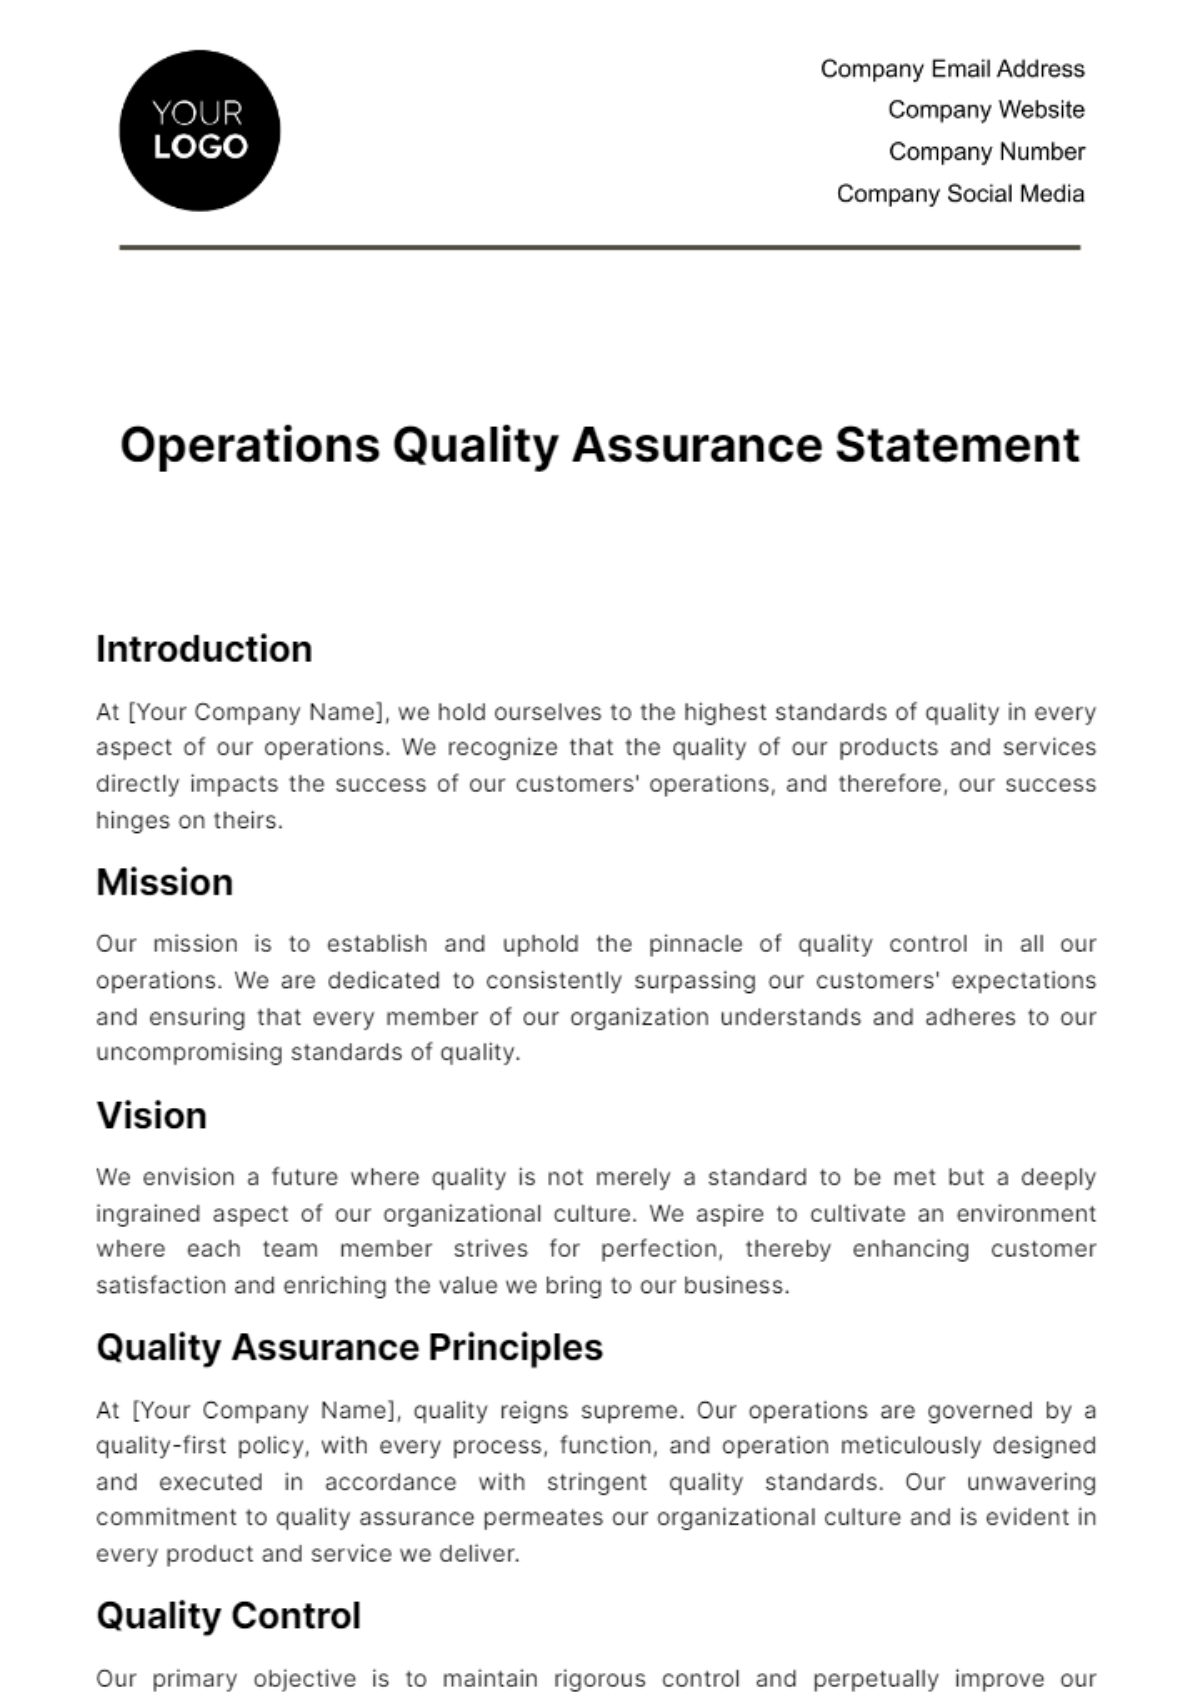 Free Operations Quality Assurance Statement Template